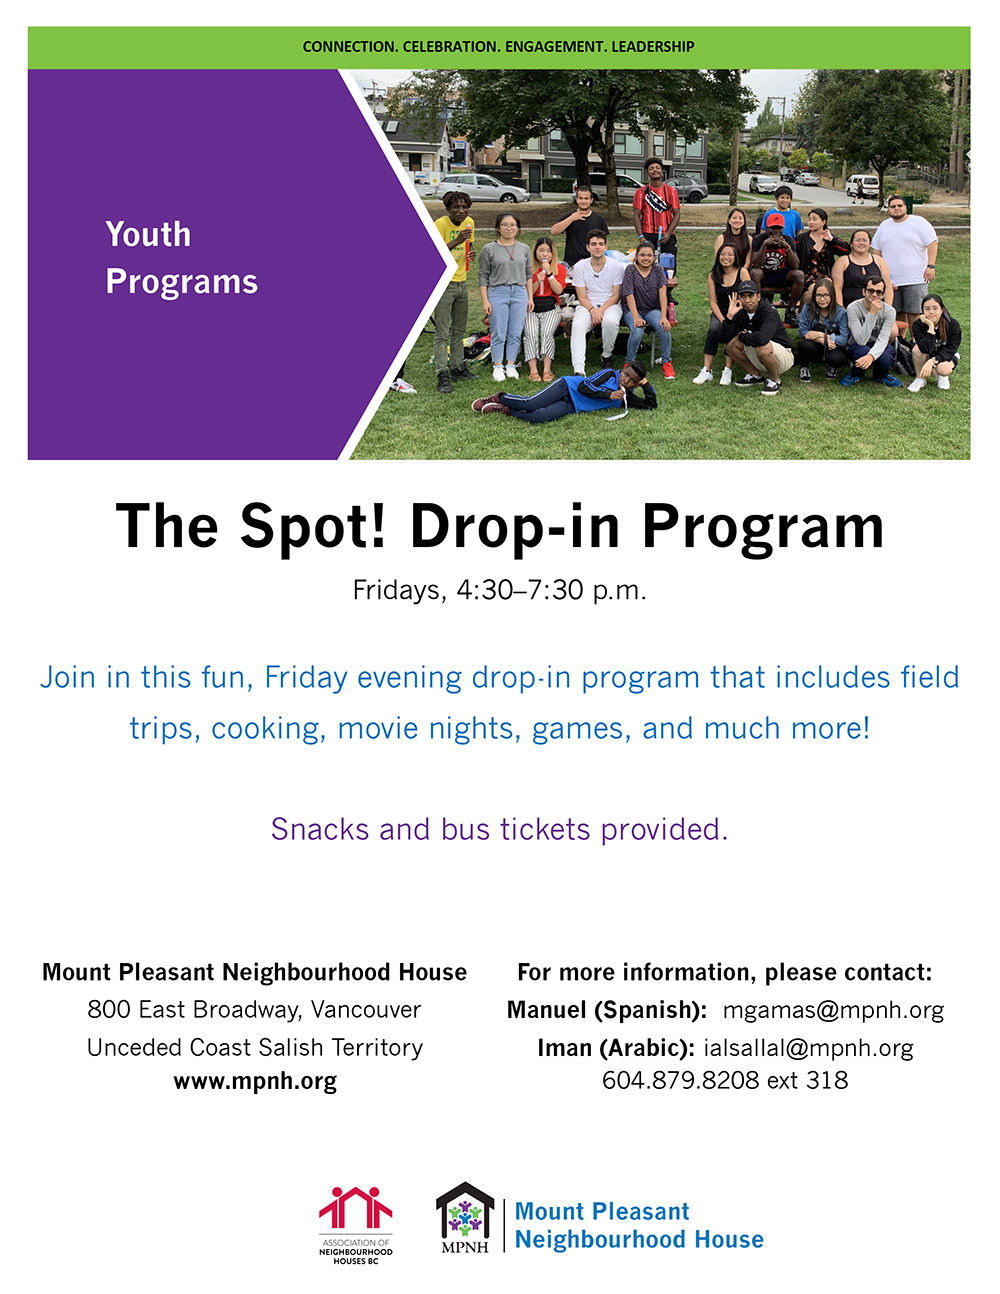 Poster for The Spot! Drop-In Program showing a group of young people smiling